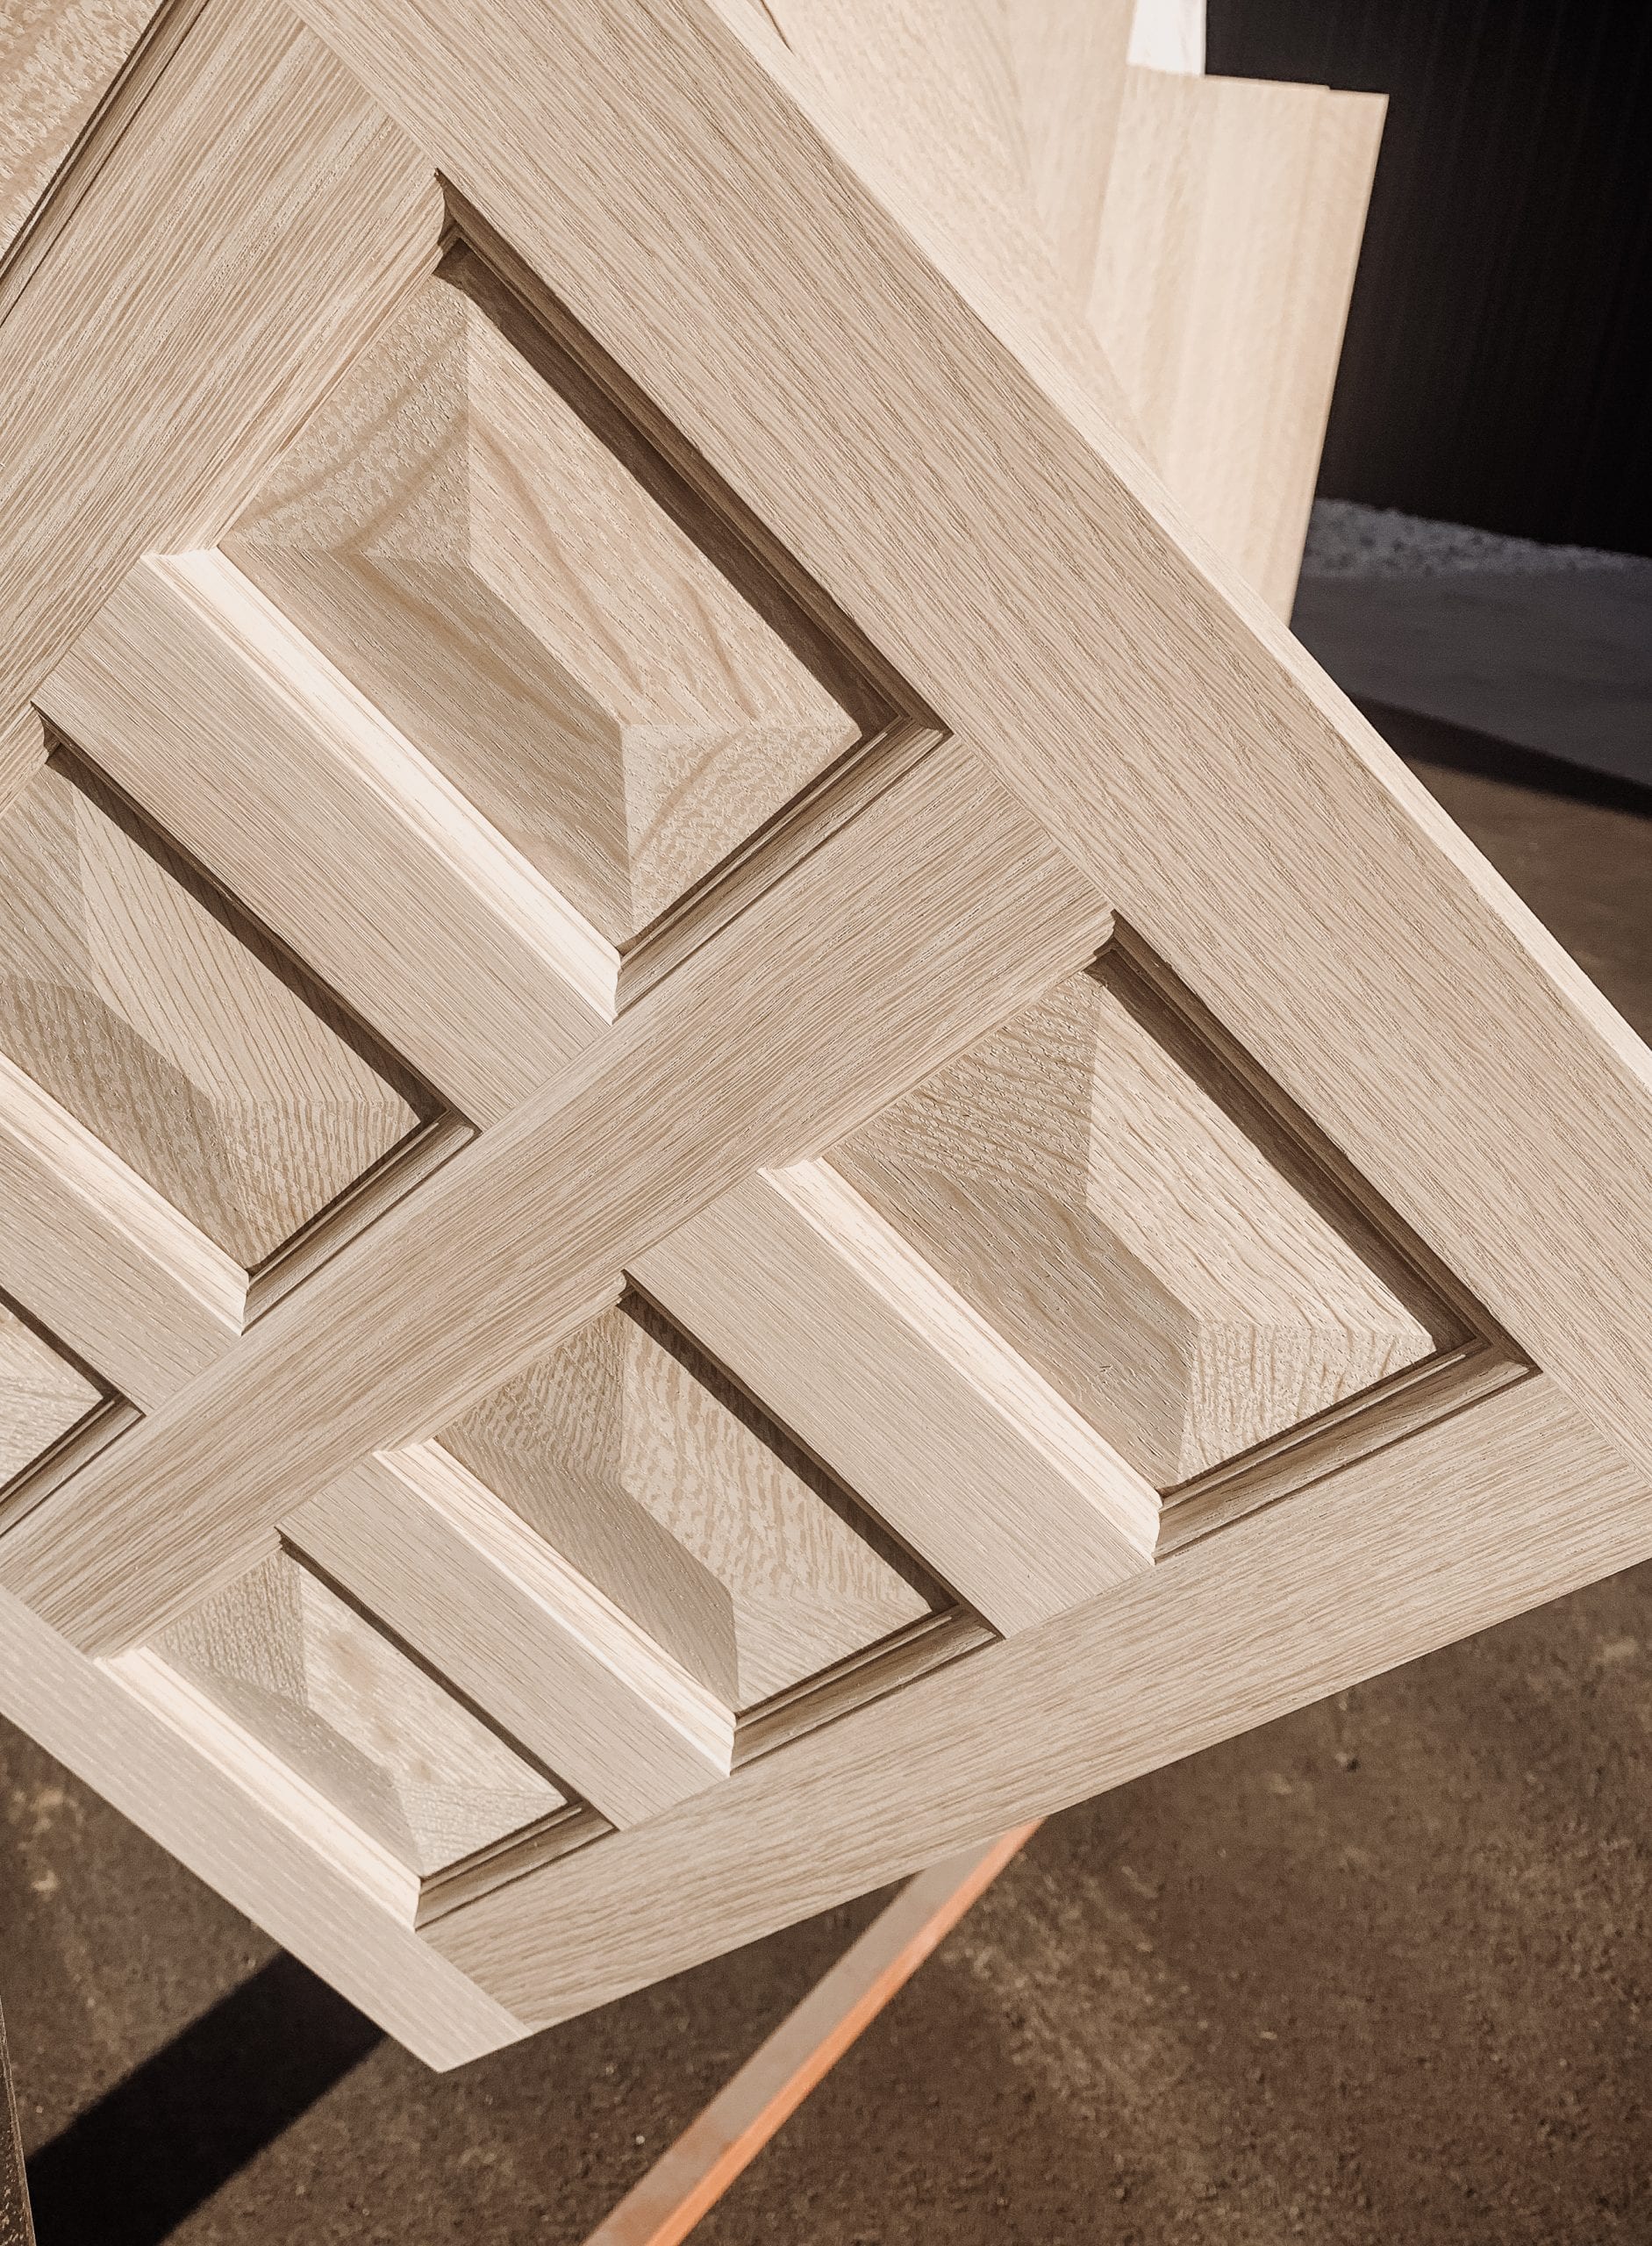 Patterned wood cabinet being built